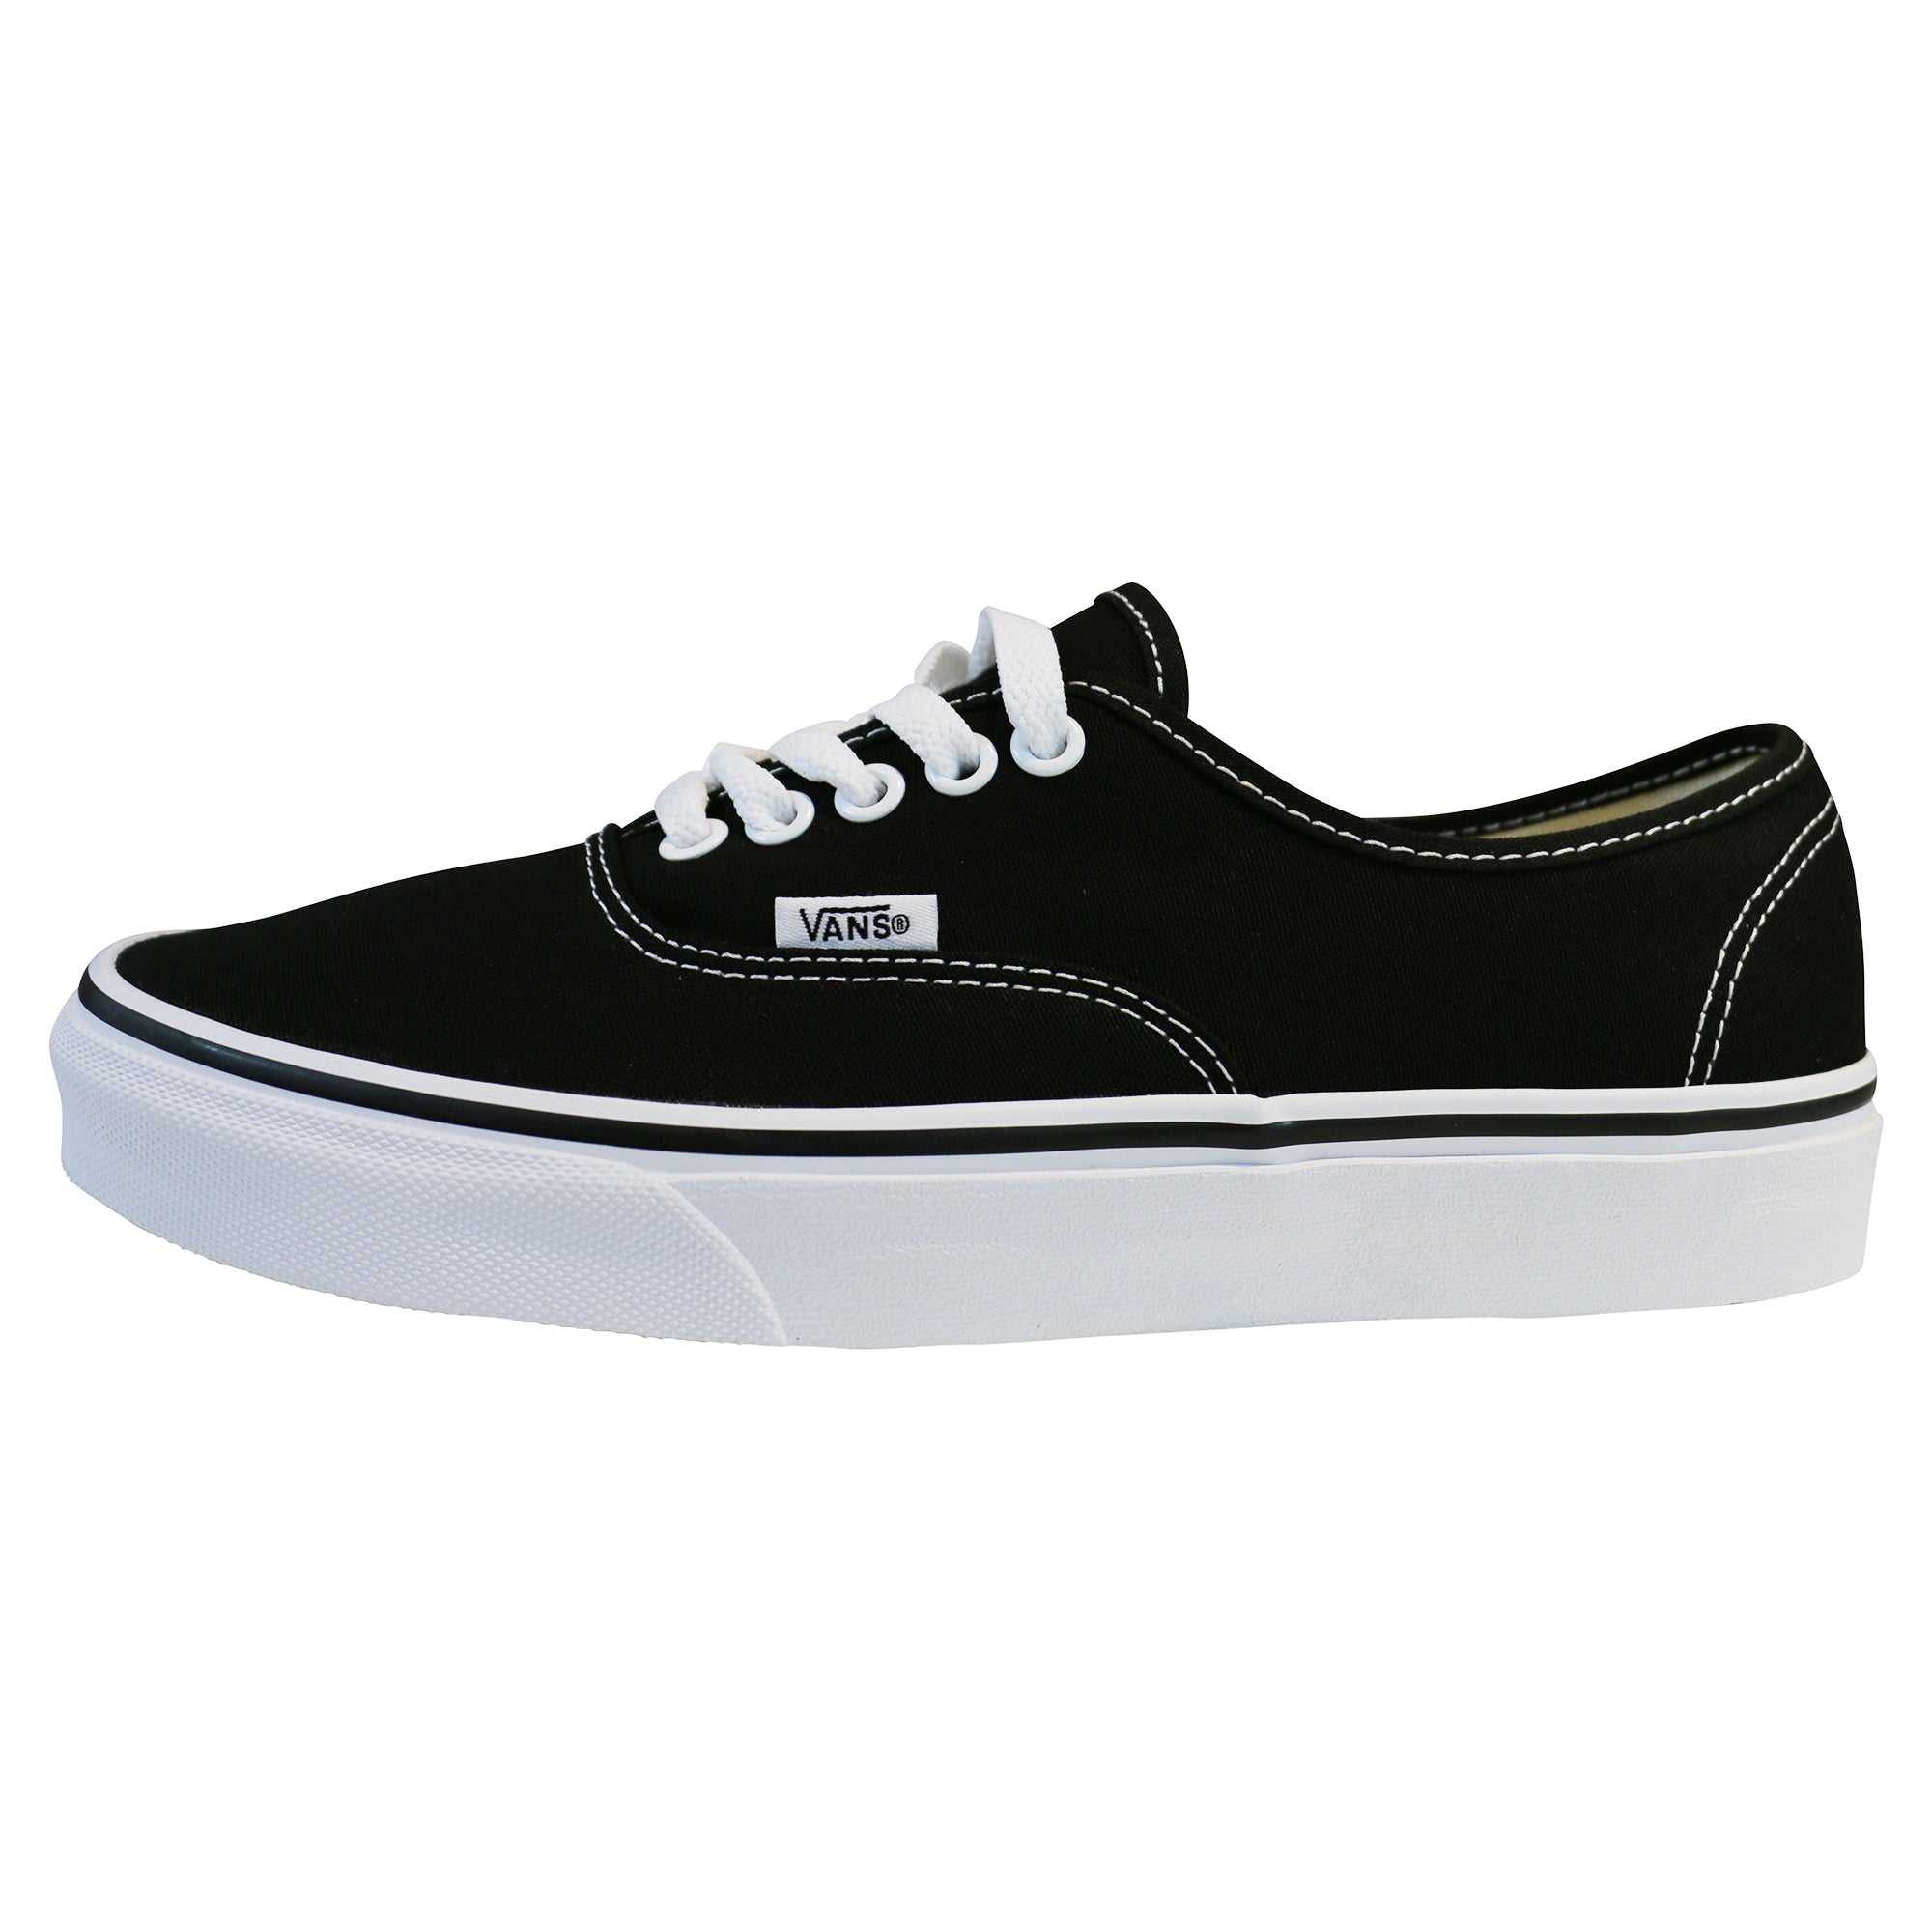 classic vans black and white